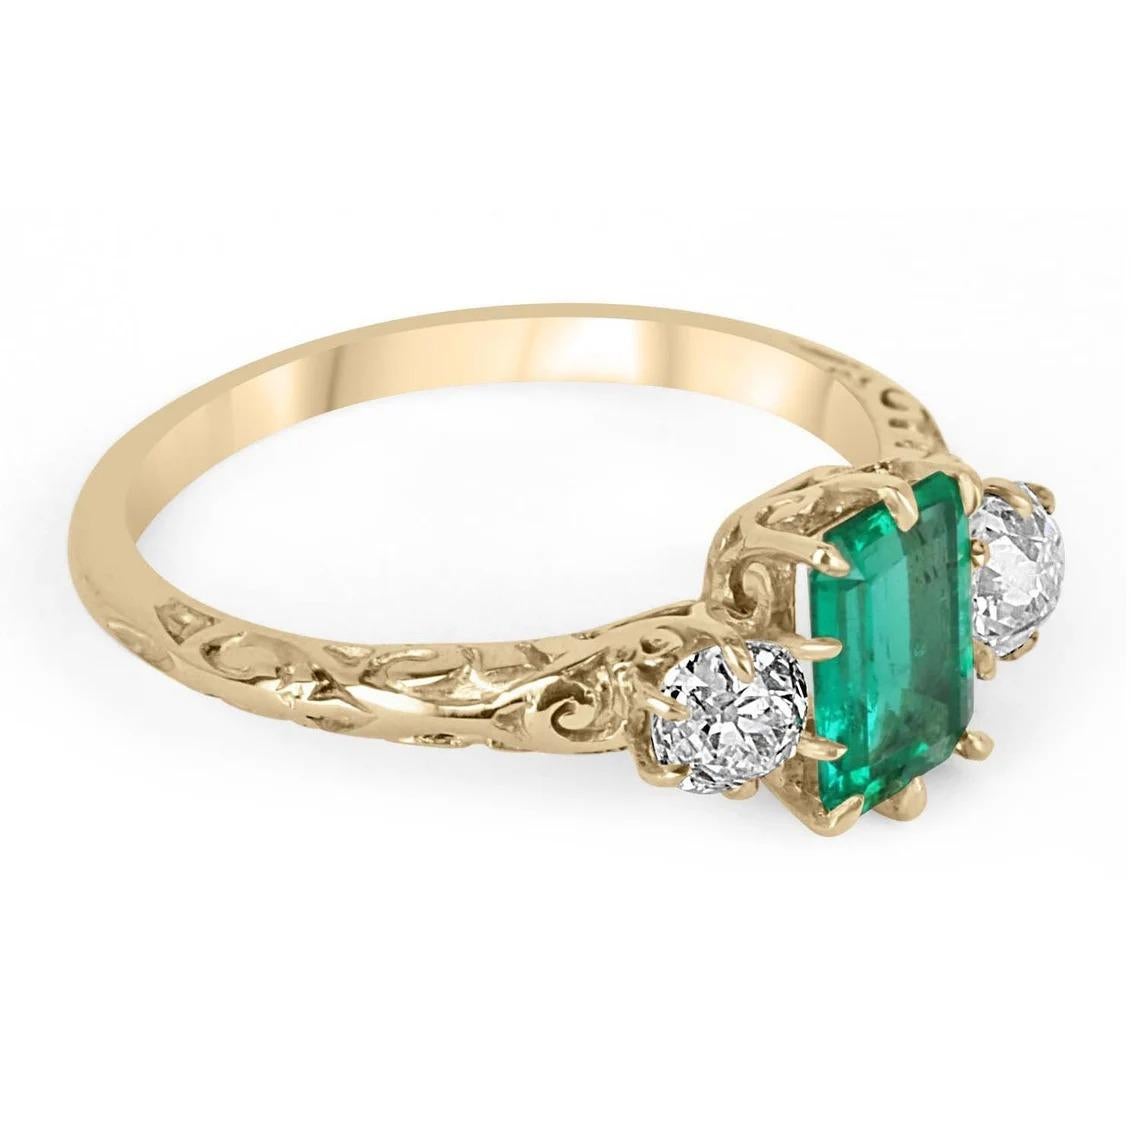 A rare find, a Colombian emerald and old European cut diamond three stone. An extraordinary, Victorian-inspired ring. Dexterously crafted in gleaming 18K yellow, this ring features a high quality, 1.0-carat natural Colombian emerald, emerald cut